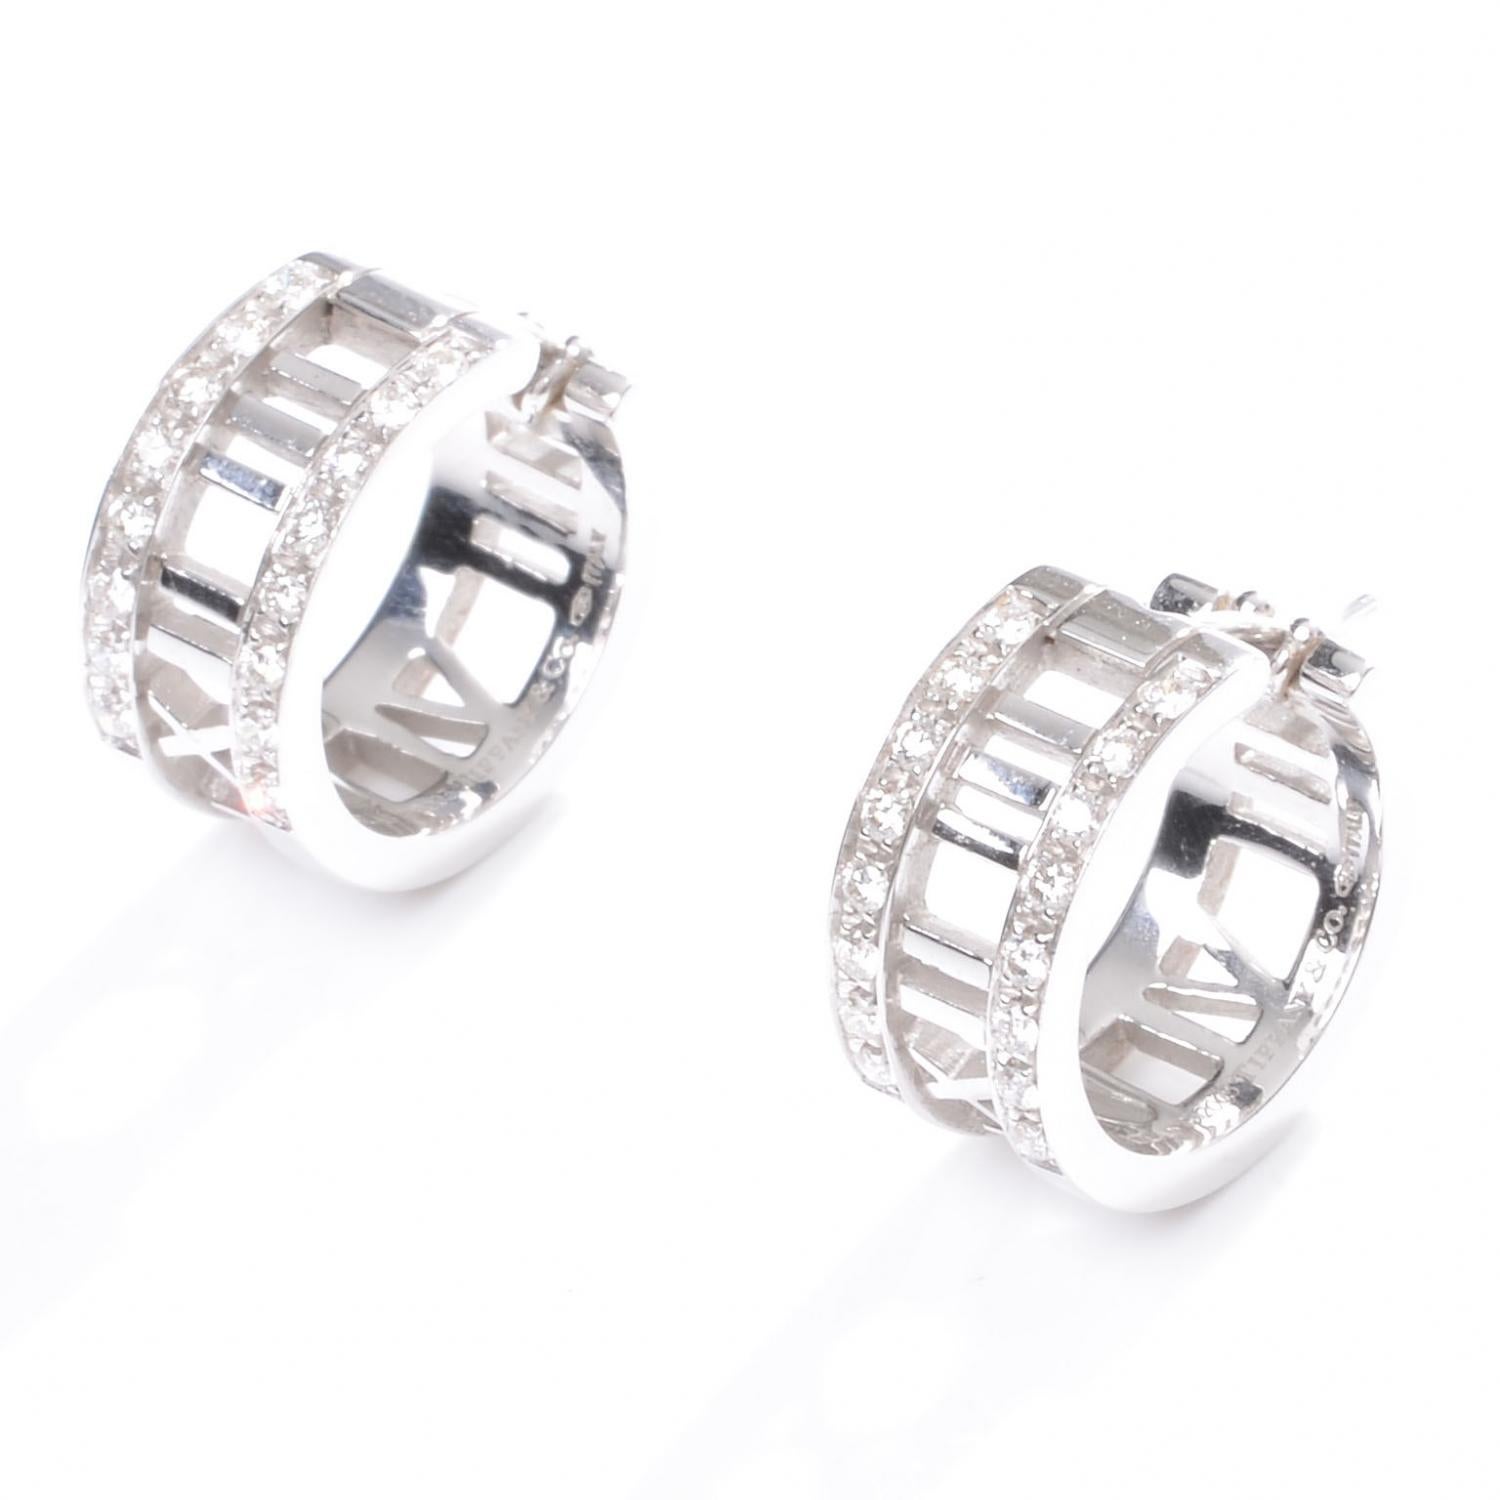 Tiffany & Co. Atlas earrings with diamonds finely crafted in 18k white gold.
A true classic authentic pair of earrings by Tiffany & Co., from the ATLAS collection. These beauties are crafted in 18kt white gold with polished and textured finish. They